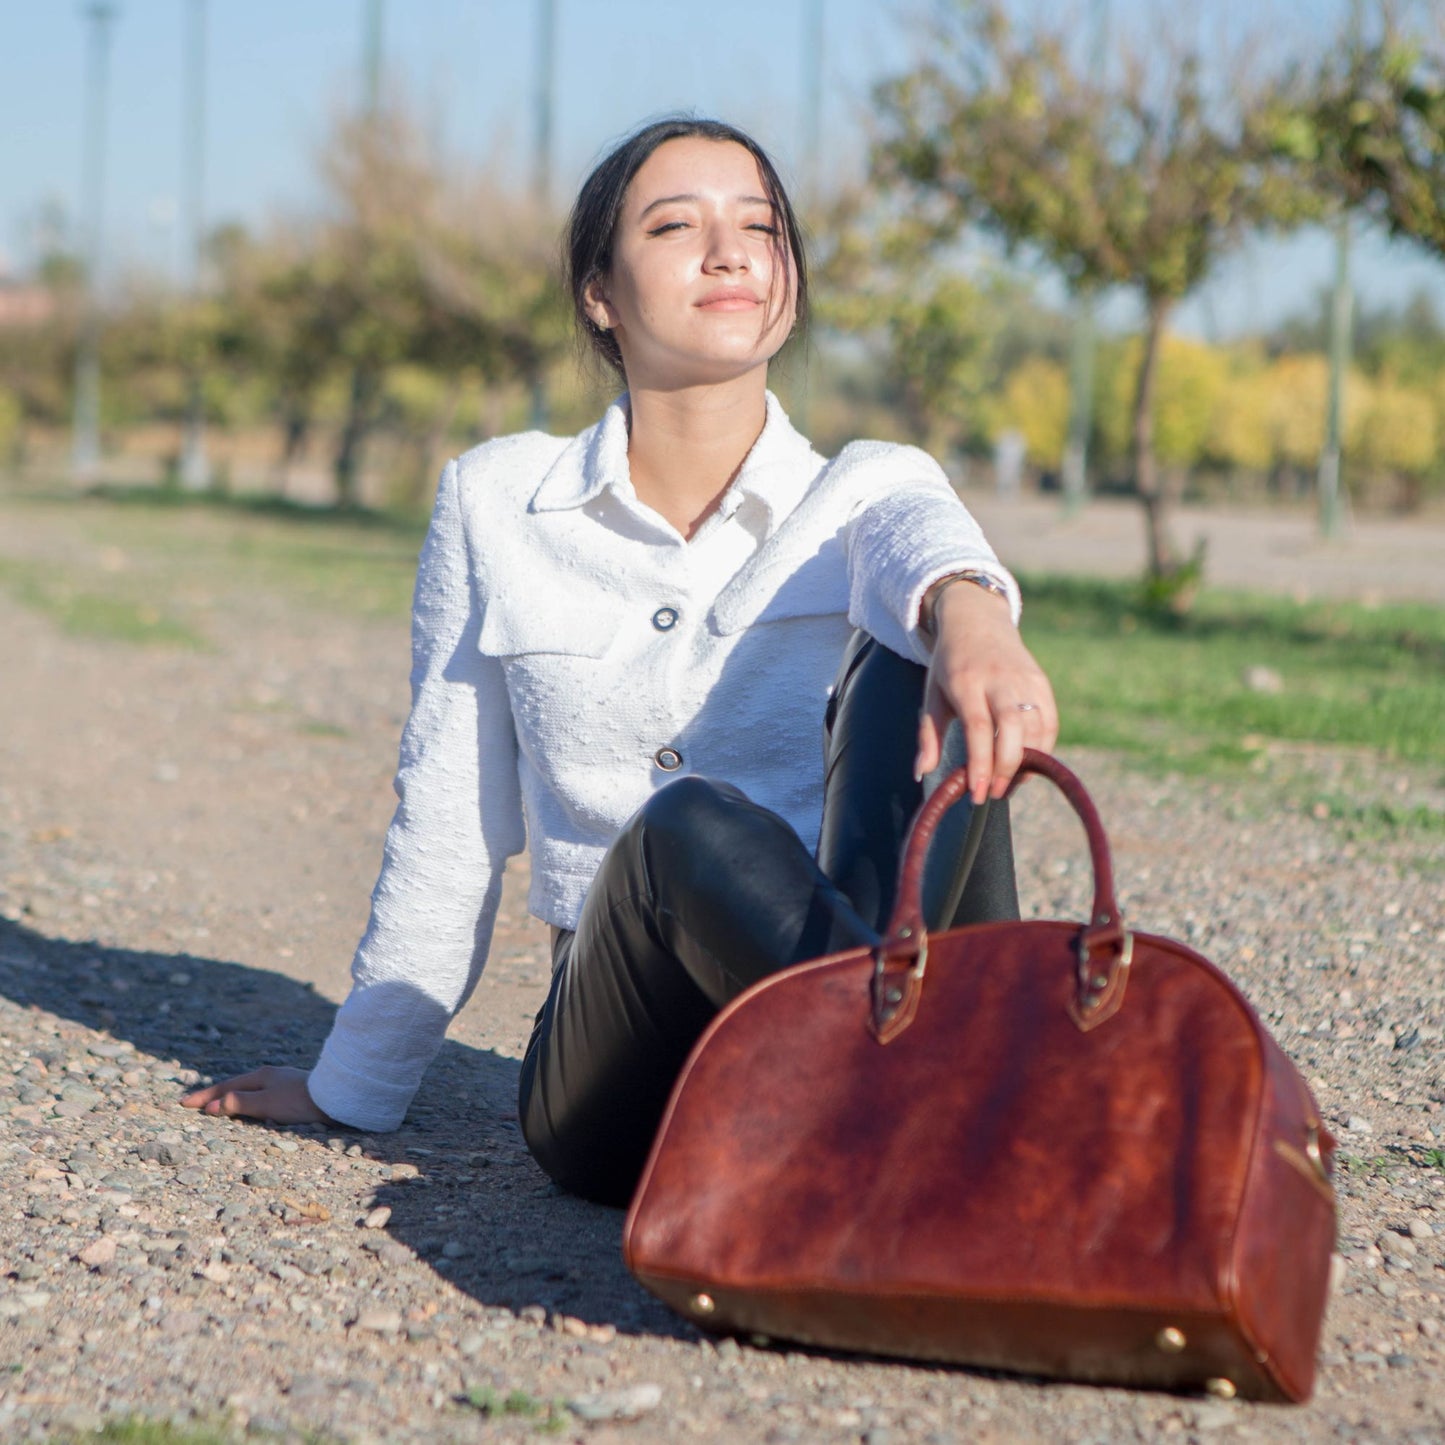 Women's Chic Leather Duffel: Ideal for Weekends